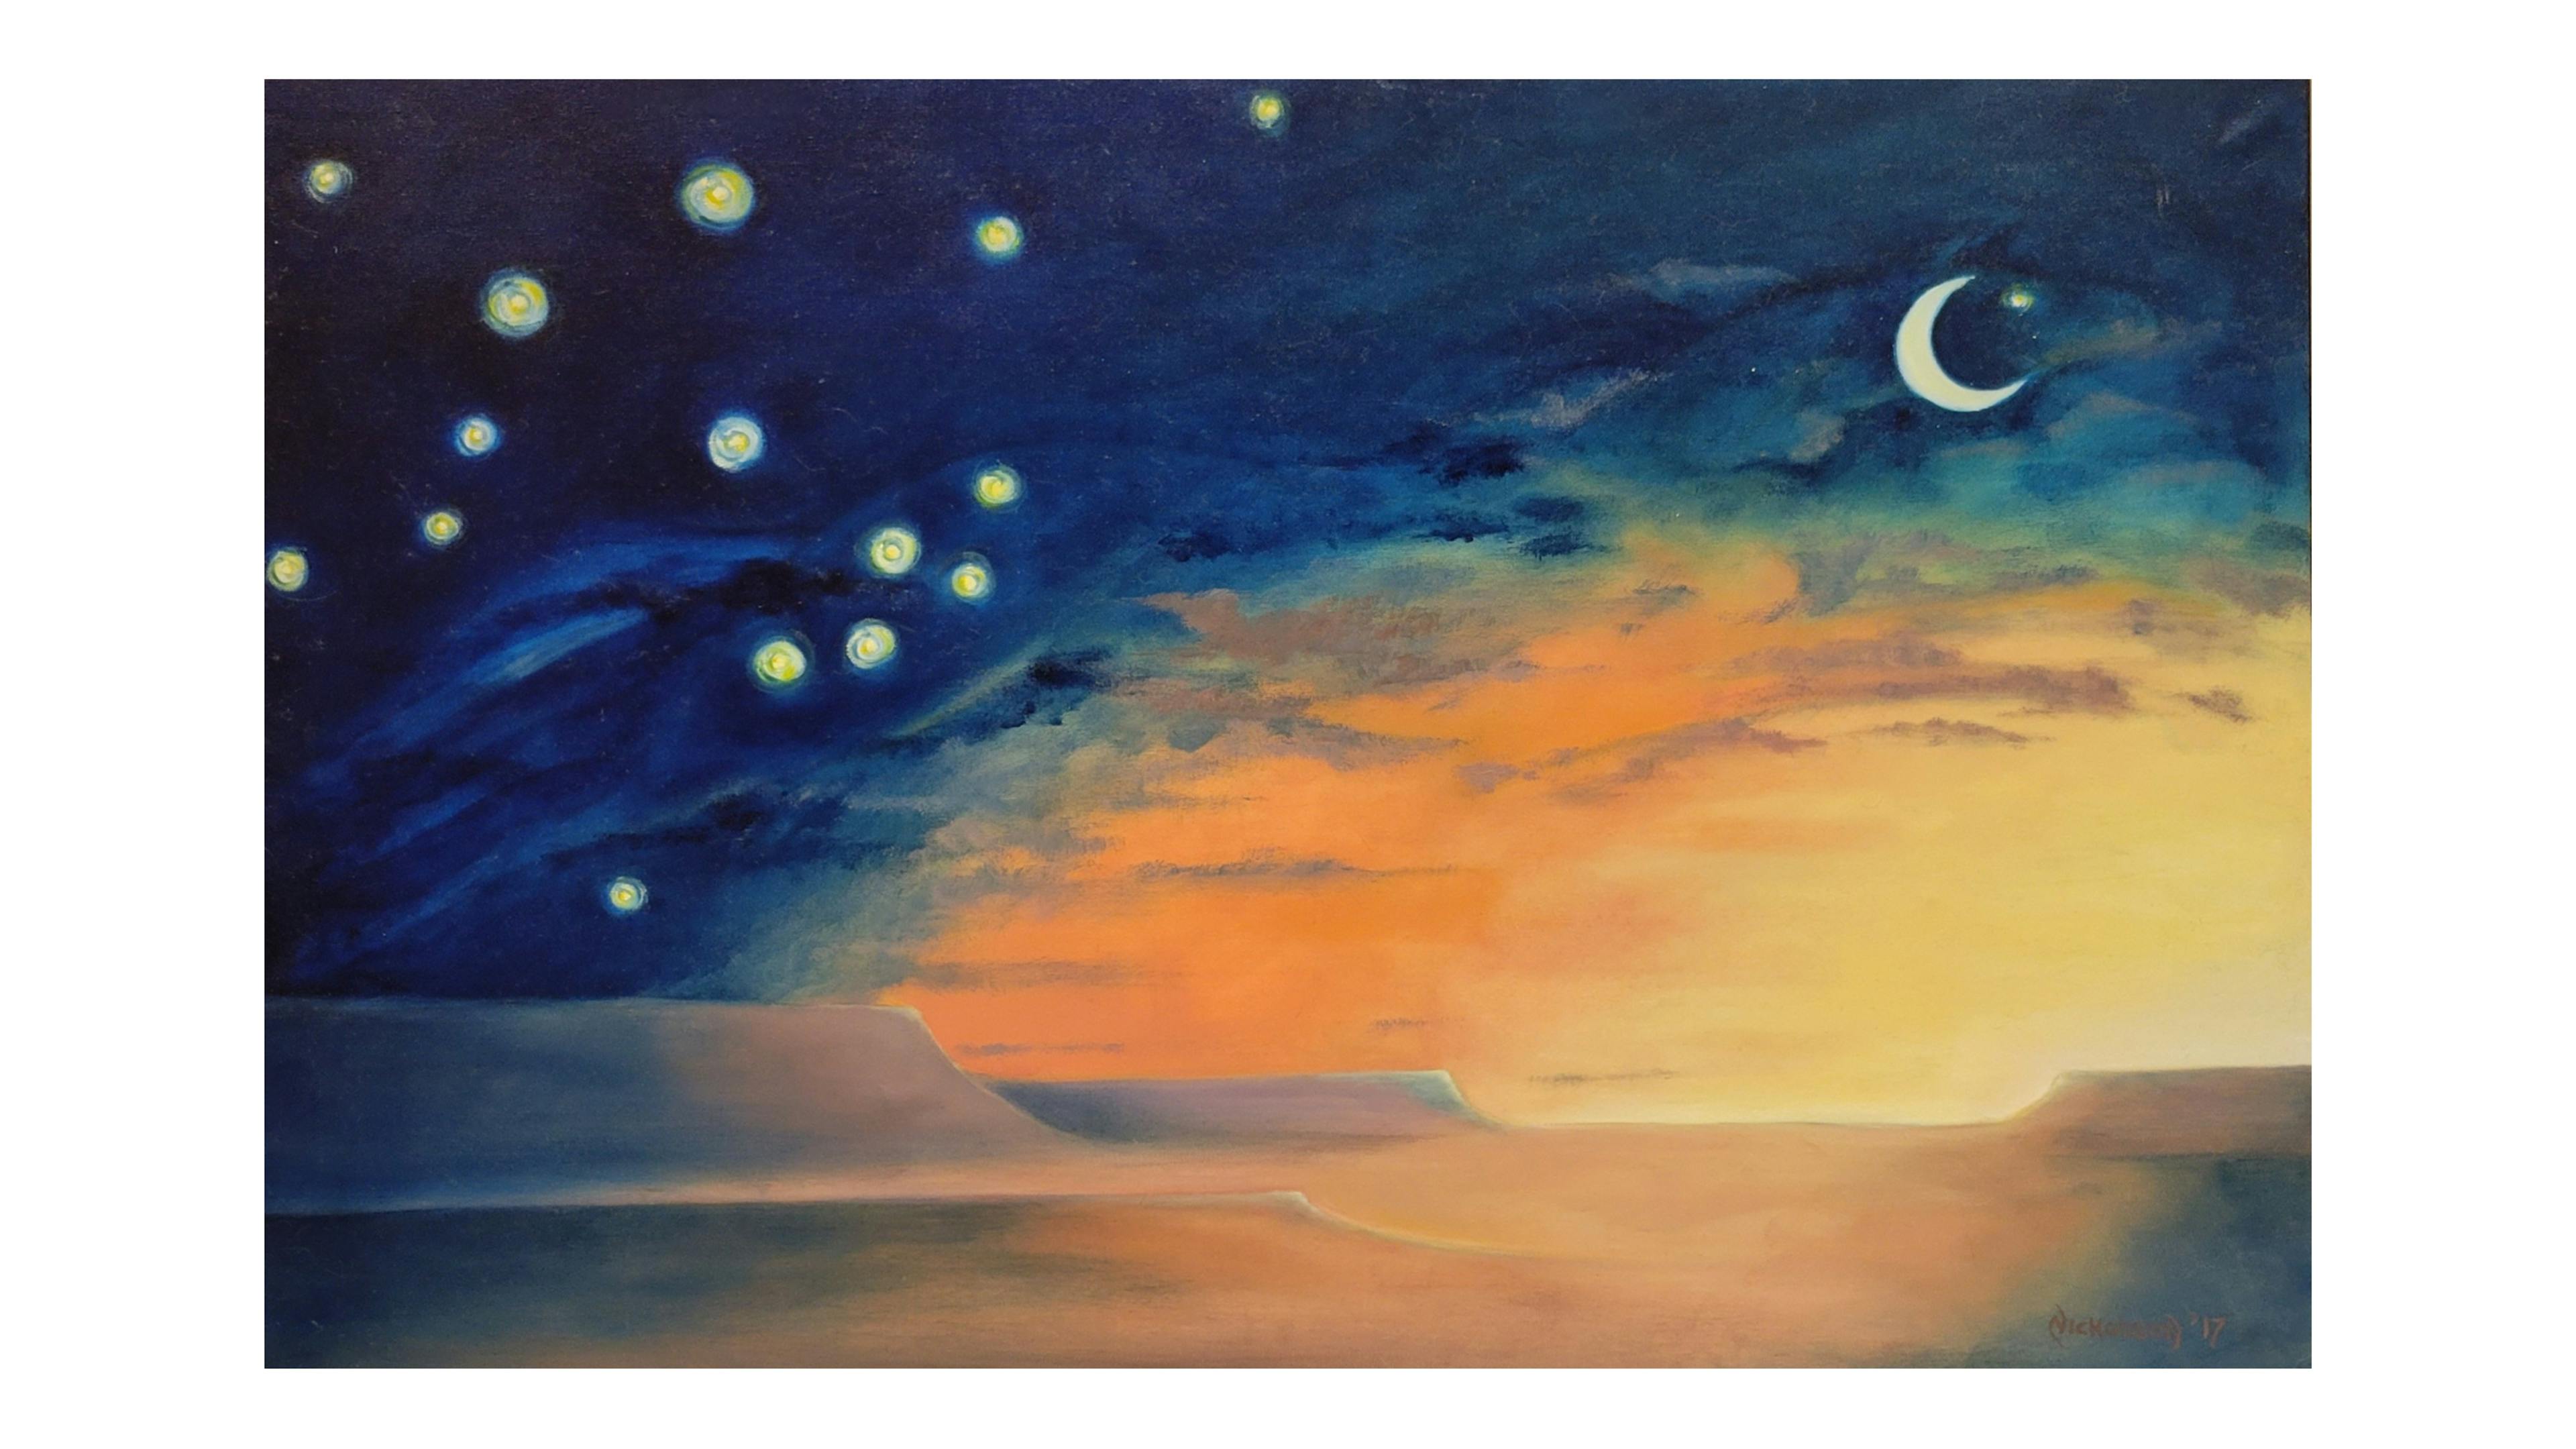 This painting depicts a southwestern night scene with a yellow diminishing sunset, a cresent moon and the start of the revealing of the night stars. Deeper into the painting reveals a night horse, with a star for an eye, the crescent moon for a jawbone and a light outline of galloping legs and a tail.